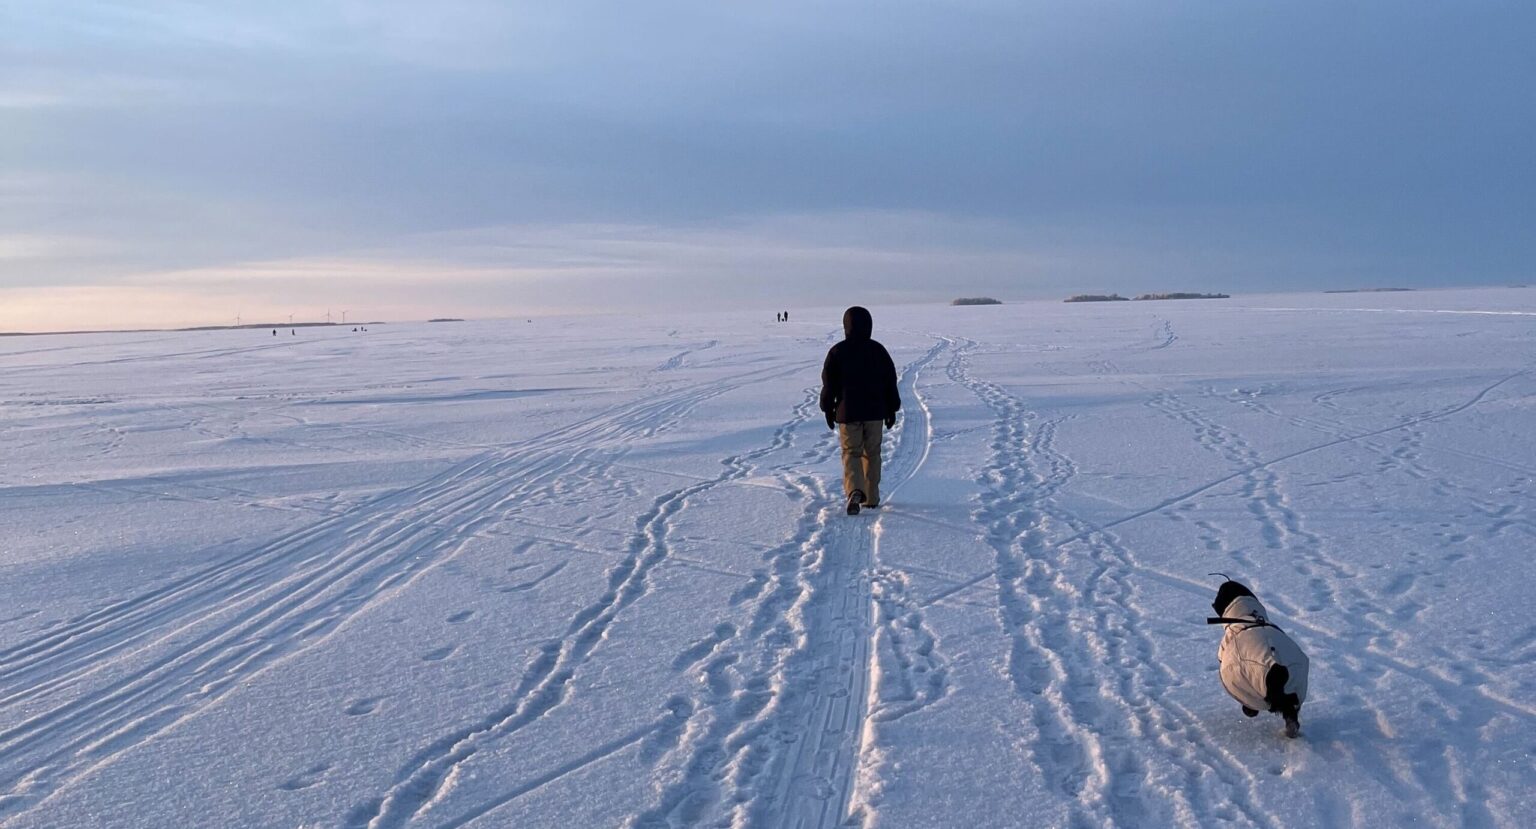 A person walks in the snow followed by a dog in Finland. The land is very flat and they sky is grey with orange on the horizon.